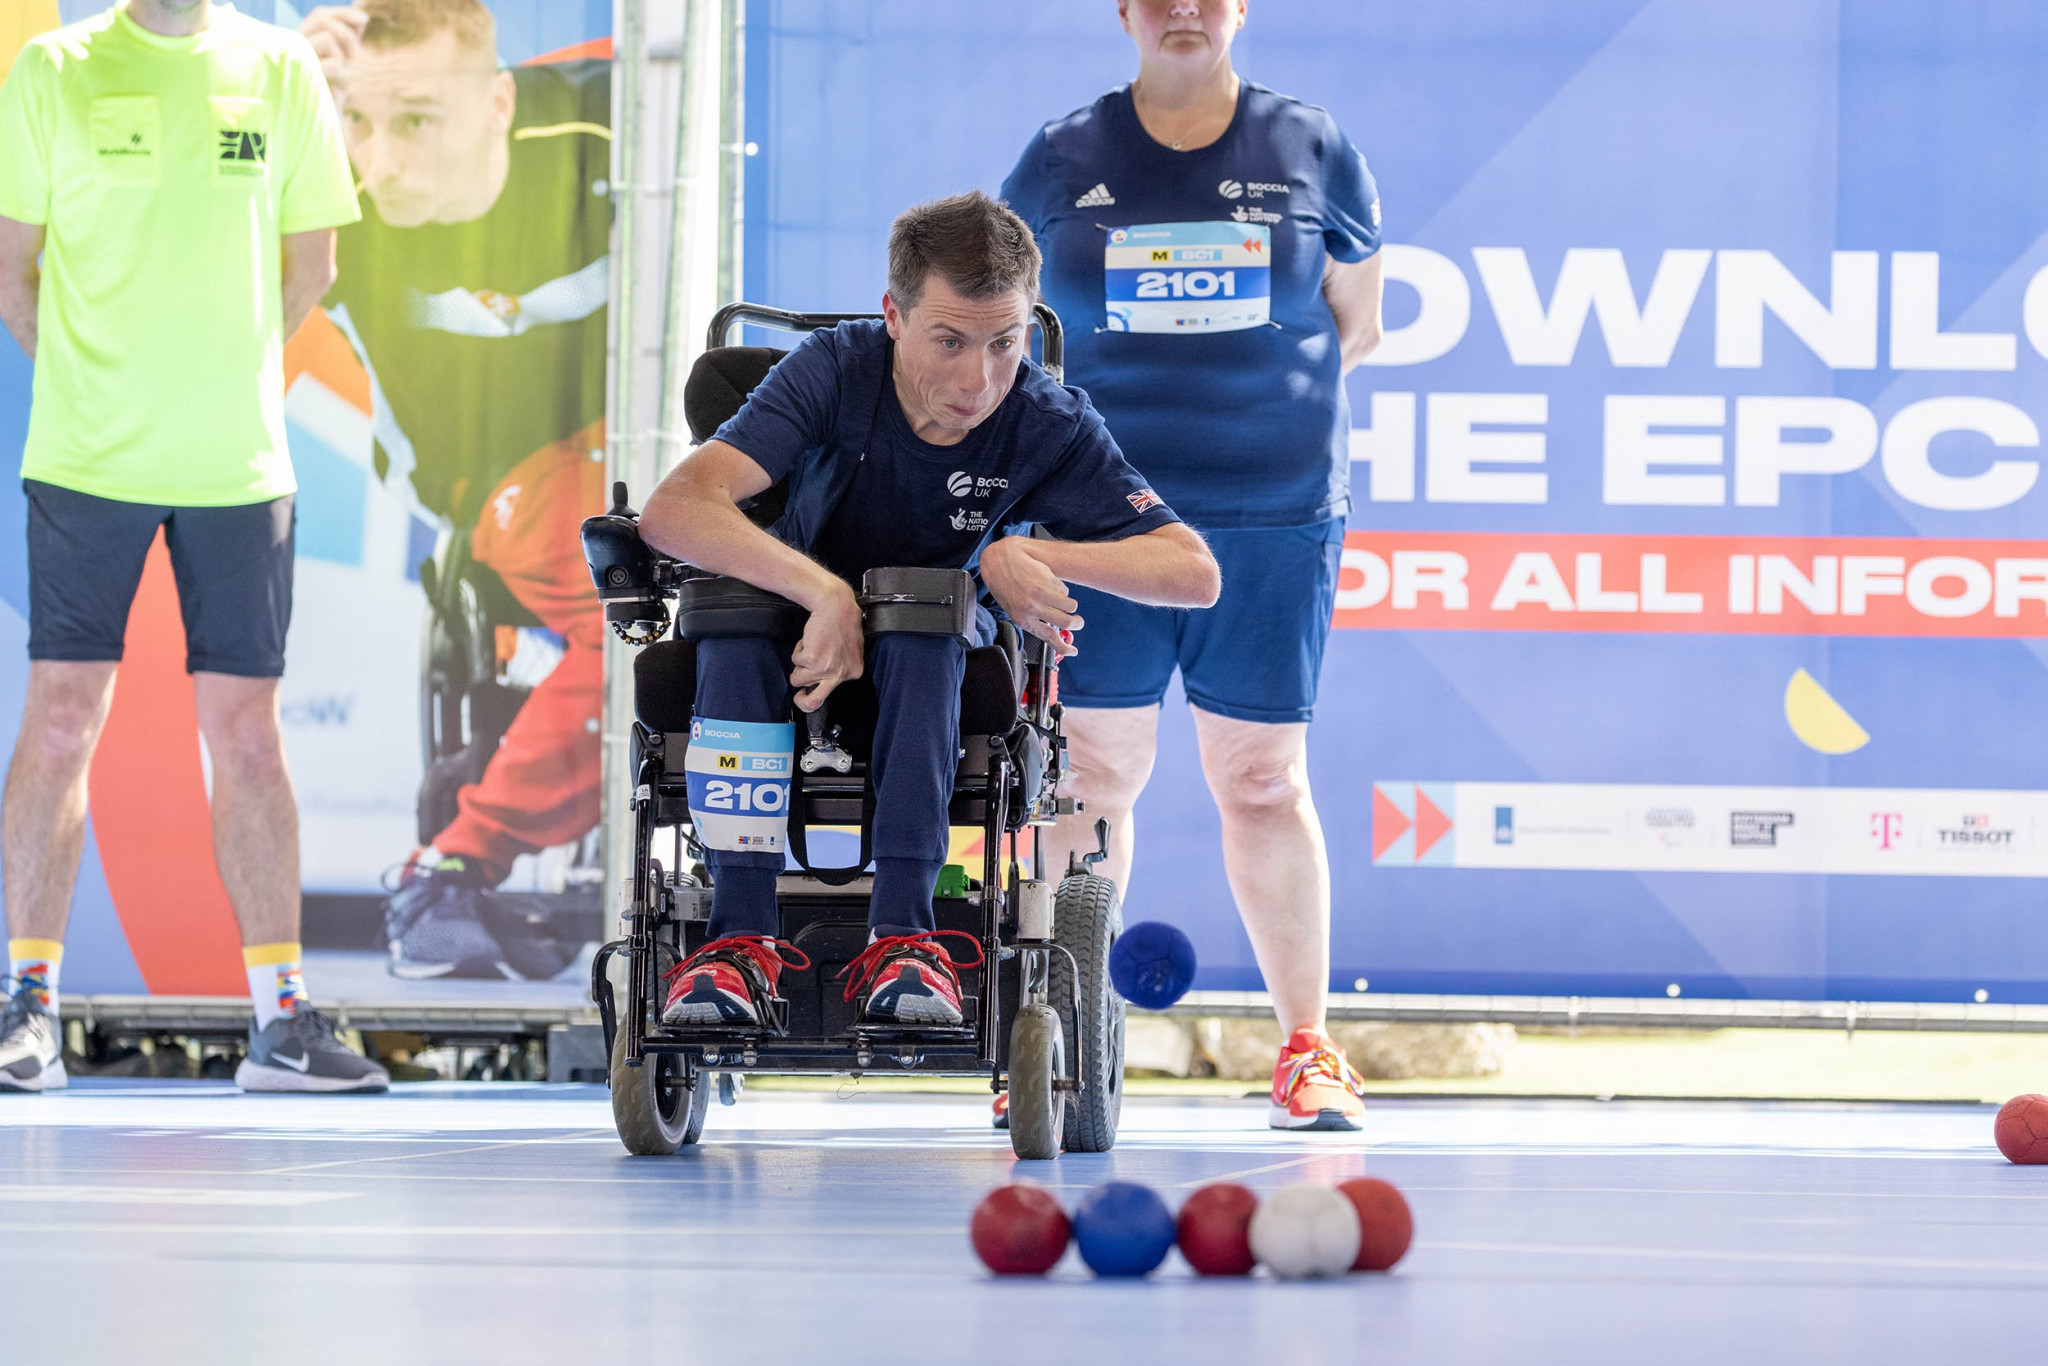 Three-time Paralympic champion David Smith of Britain was defeated by home favourite Daniel Perez in the men’s BC1 final ©EPC